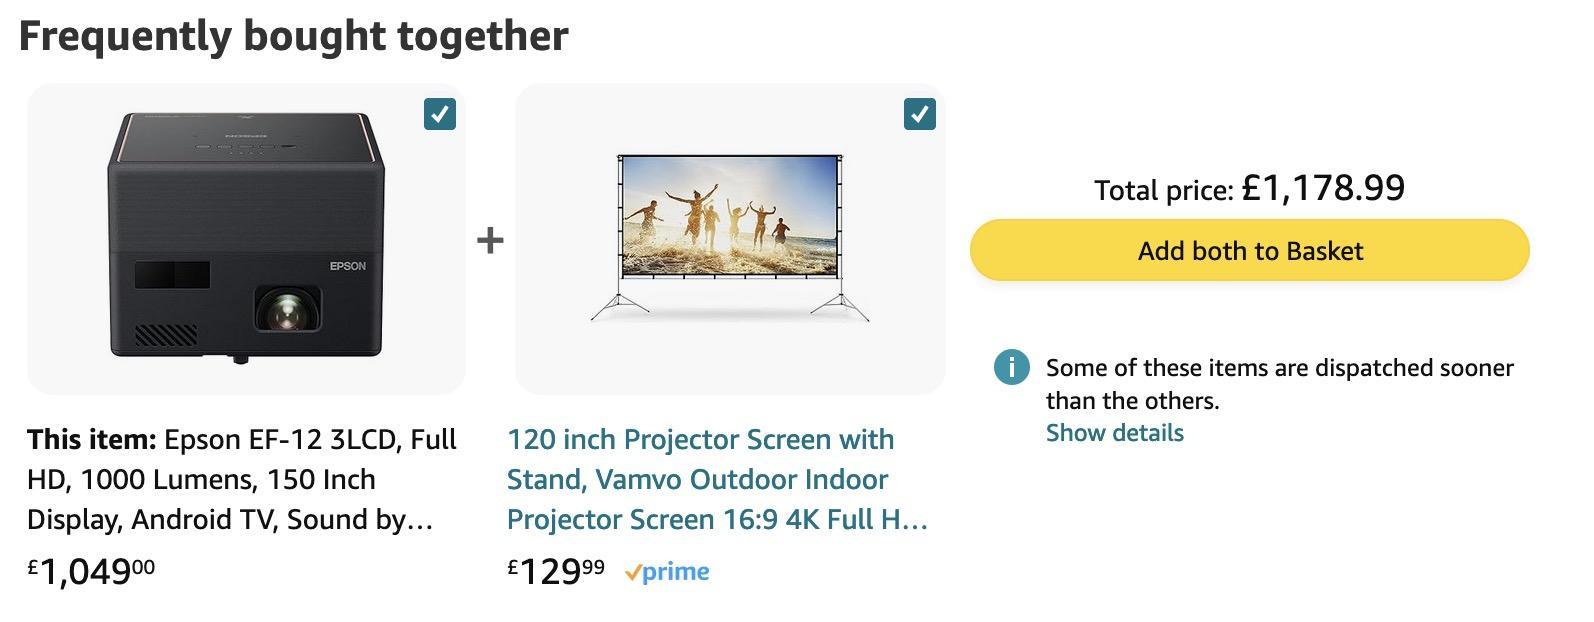 Example of frequently bought together items